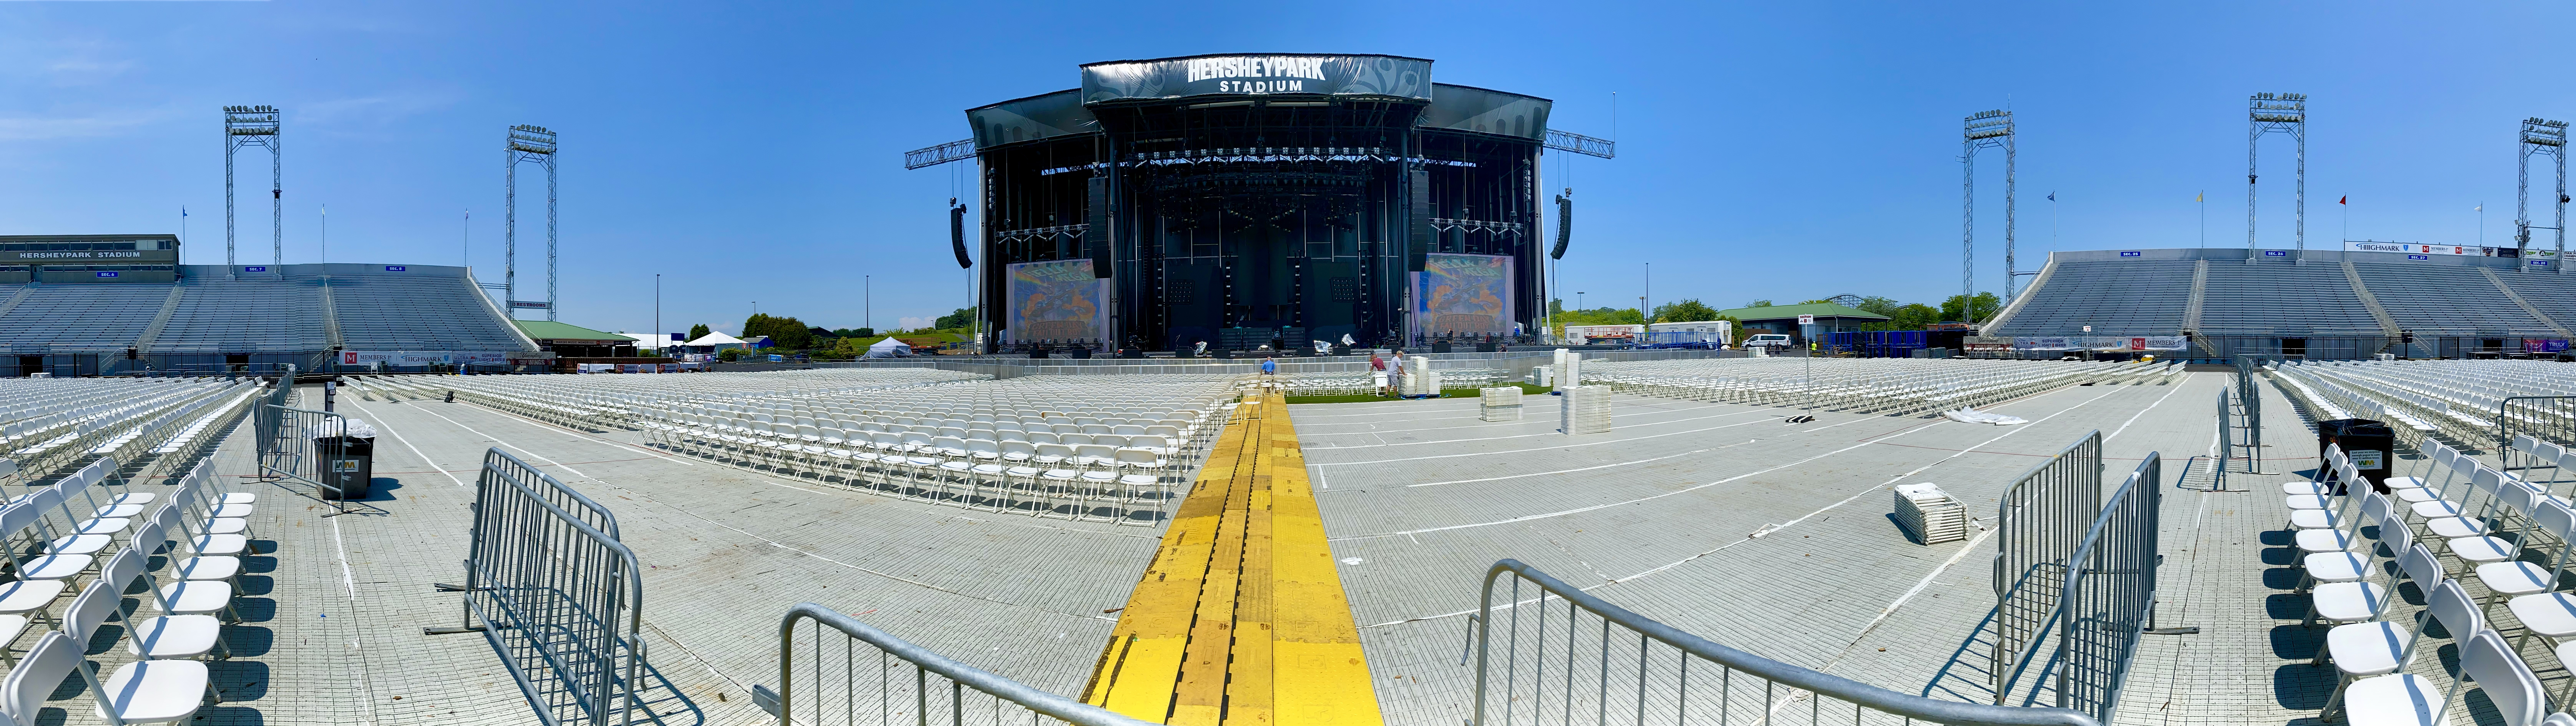 The calm before the storm at HersheyPark Stadium. The tour’s d&b audiotechnik GSL P.A. covered the sold-out crowd of 40,000 with ease.